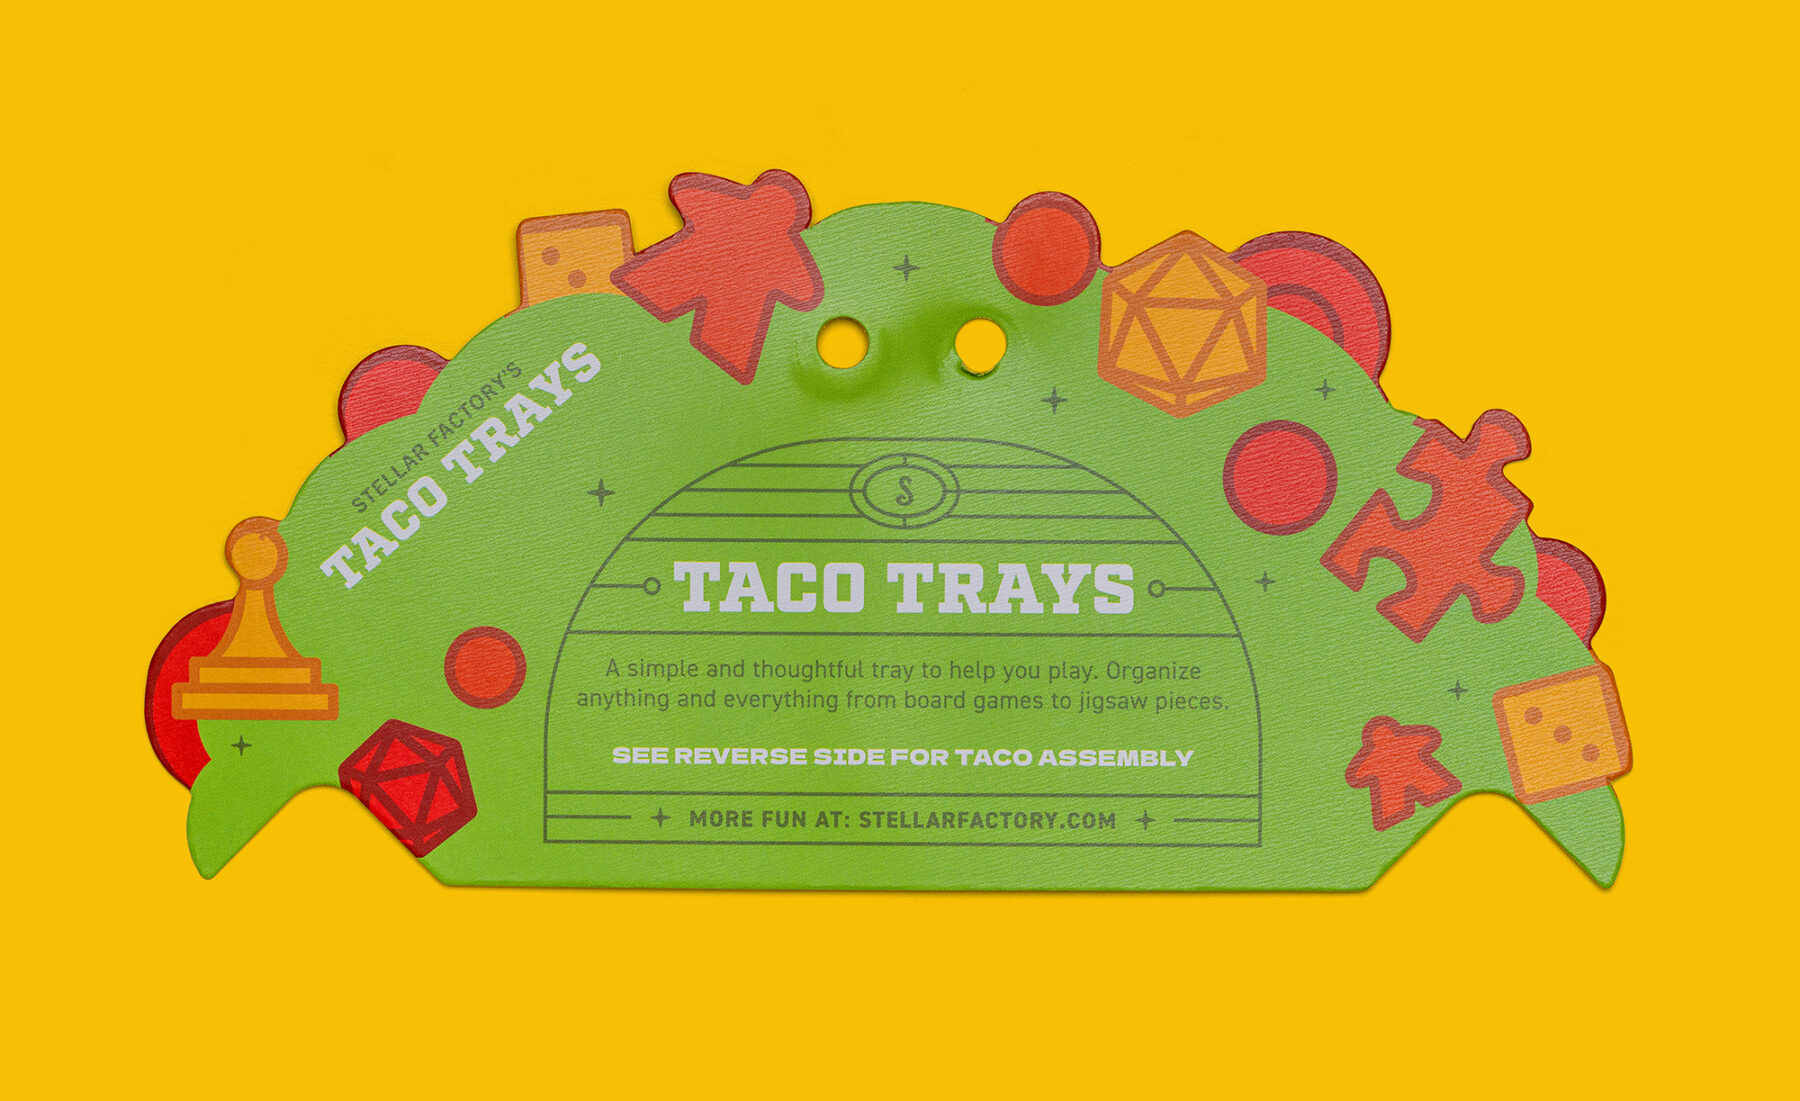 An isolated view of the front side of the packaging. It features colorful game pieces arranged on a taco shell. The center part reveals copy about the product and Stellar Factory.